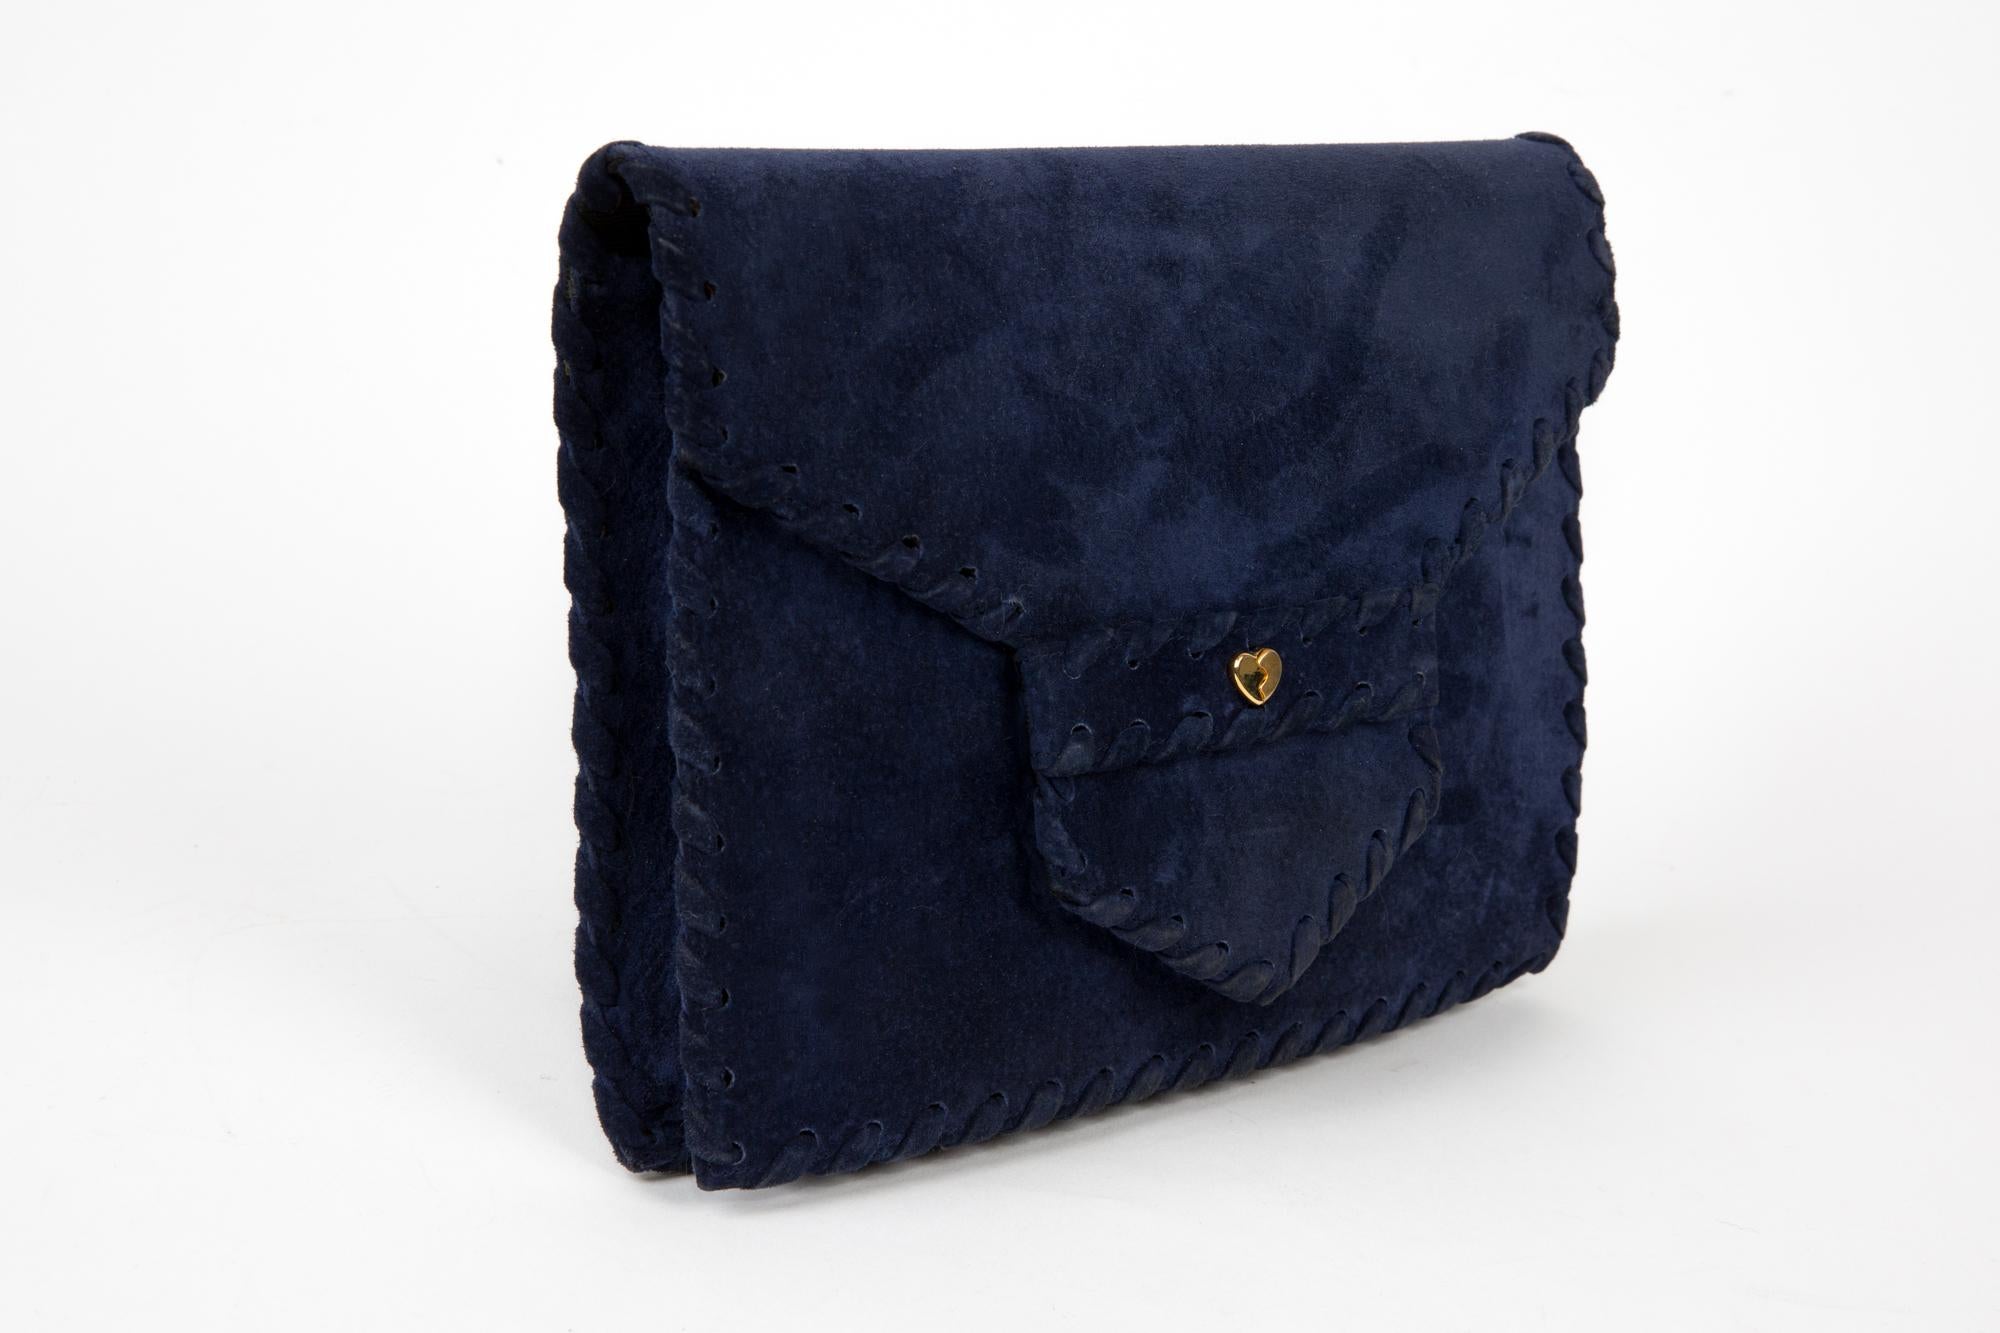 Sepcoeur blue suede leather large clutchbag featuring gold-tone front heart opening with an under snap, an envelope shape, a leather braided finishing, an inside black silk lining and a zipped pocket.  
Length at Bottom 10.2in (26cm)
Height: 7.8in.